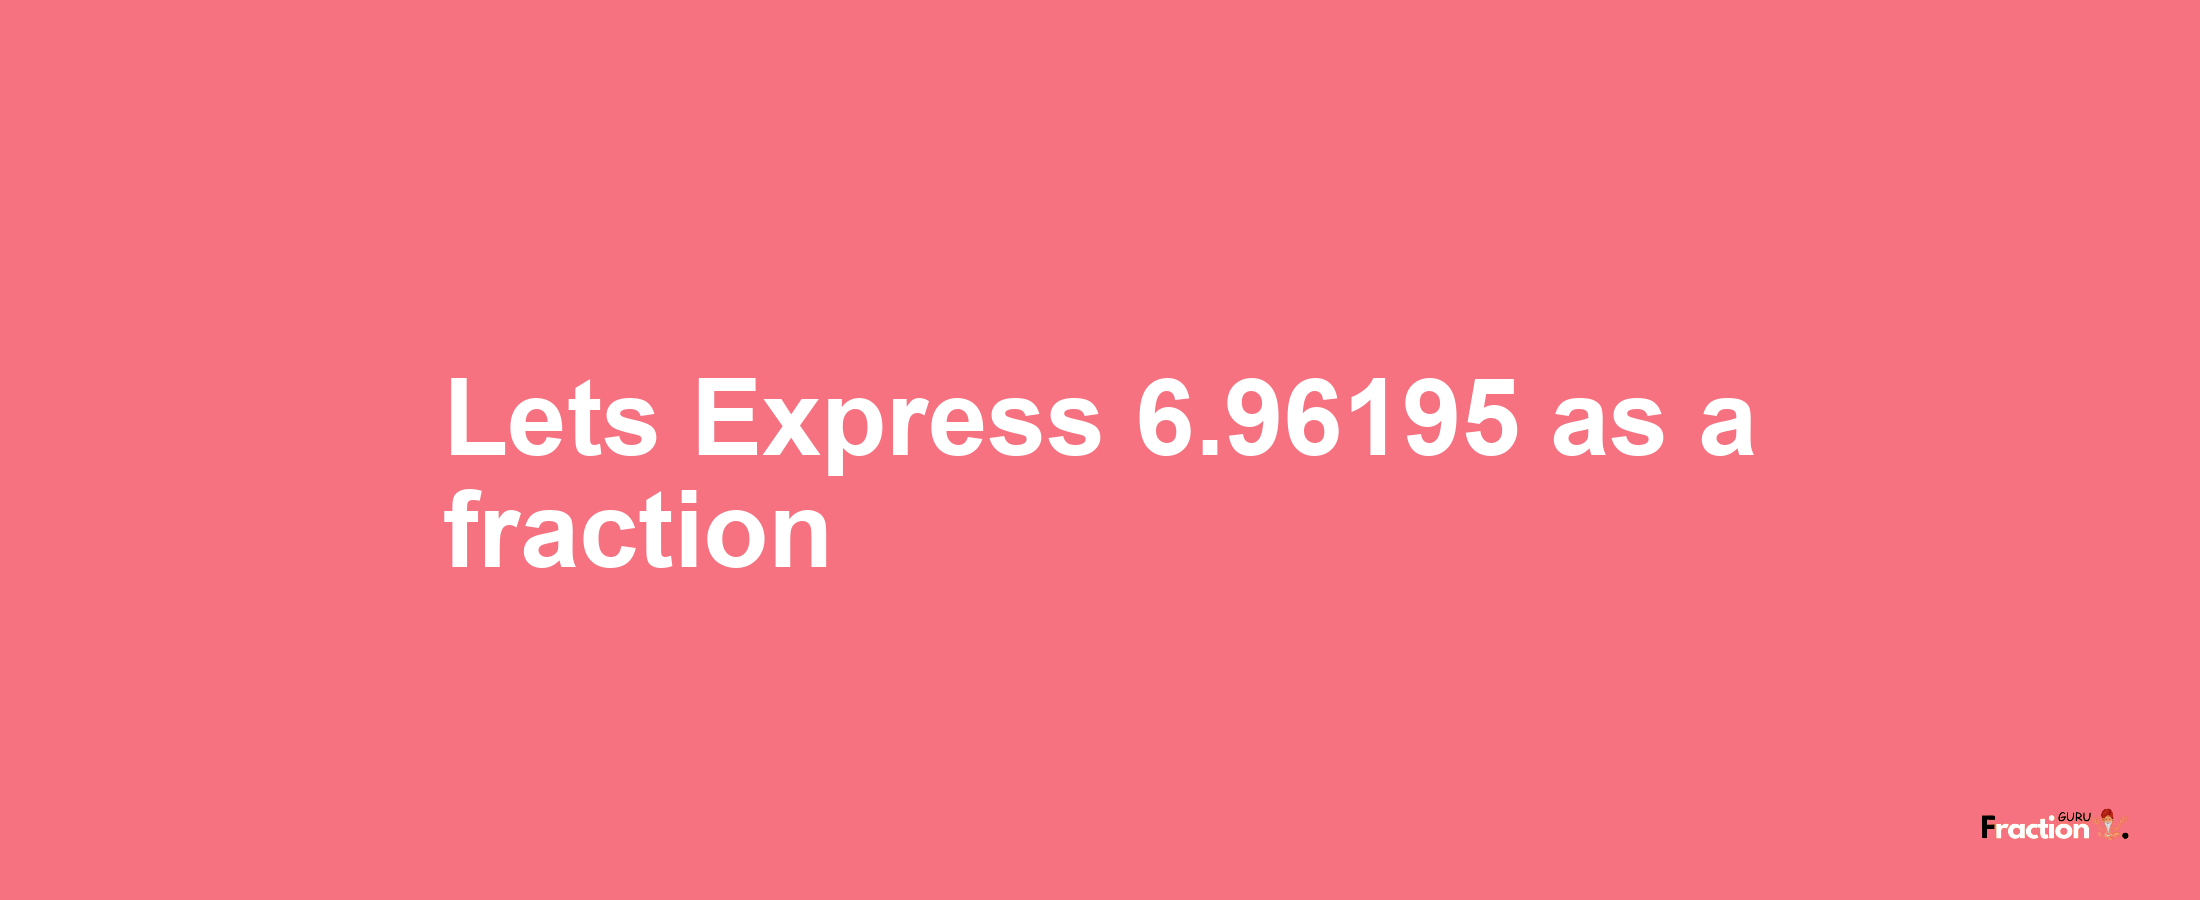 Lets Express 6.96195 as afraction